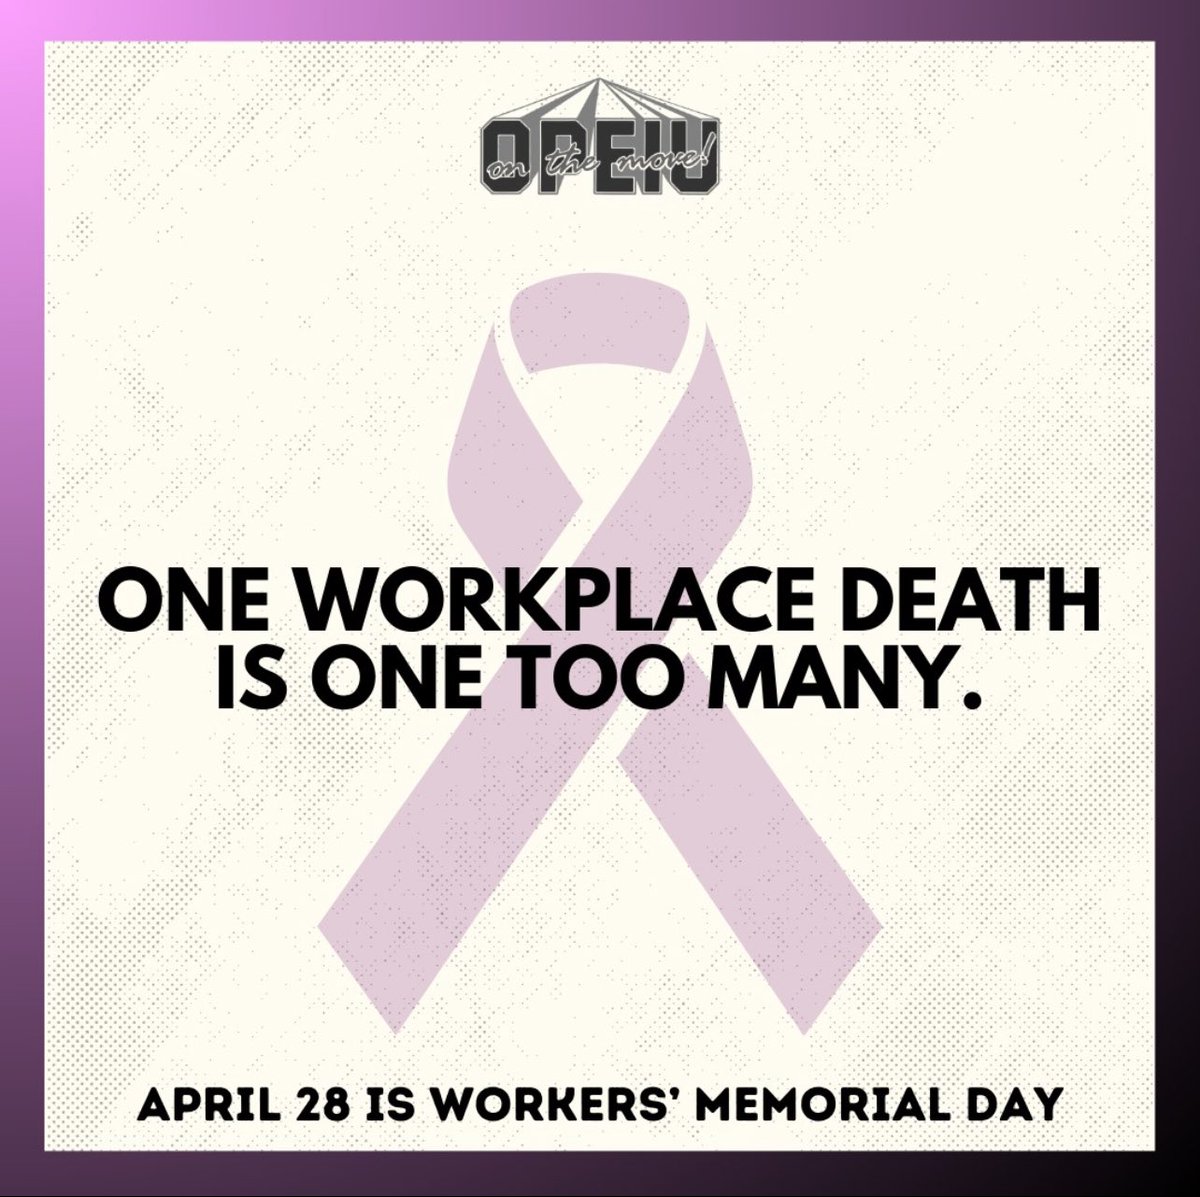 Today and every day, we honor the memory of workers who needlessly lost their lives at work. We have the capacity to prevent every single workplace death and must do everything in our power to protect working people. aflcio.org/reports/dotj-2… #WorkersMemorialDay